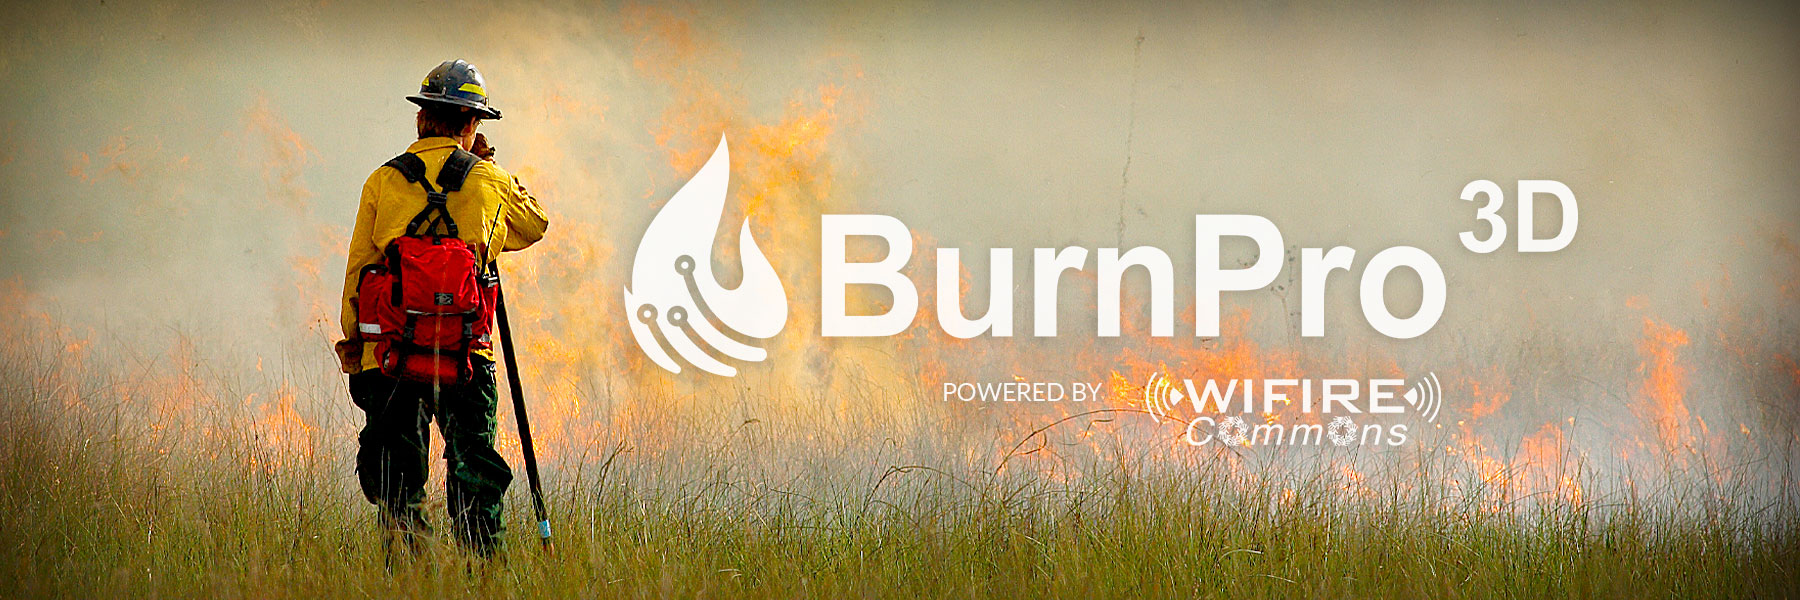 Banner image of Fire Management Officer and BurnPro3D logo - powered by WIFIRE Commons